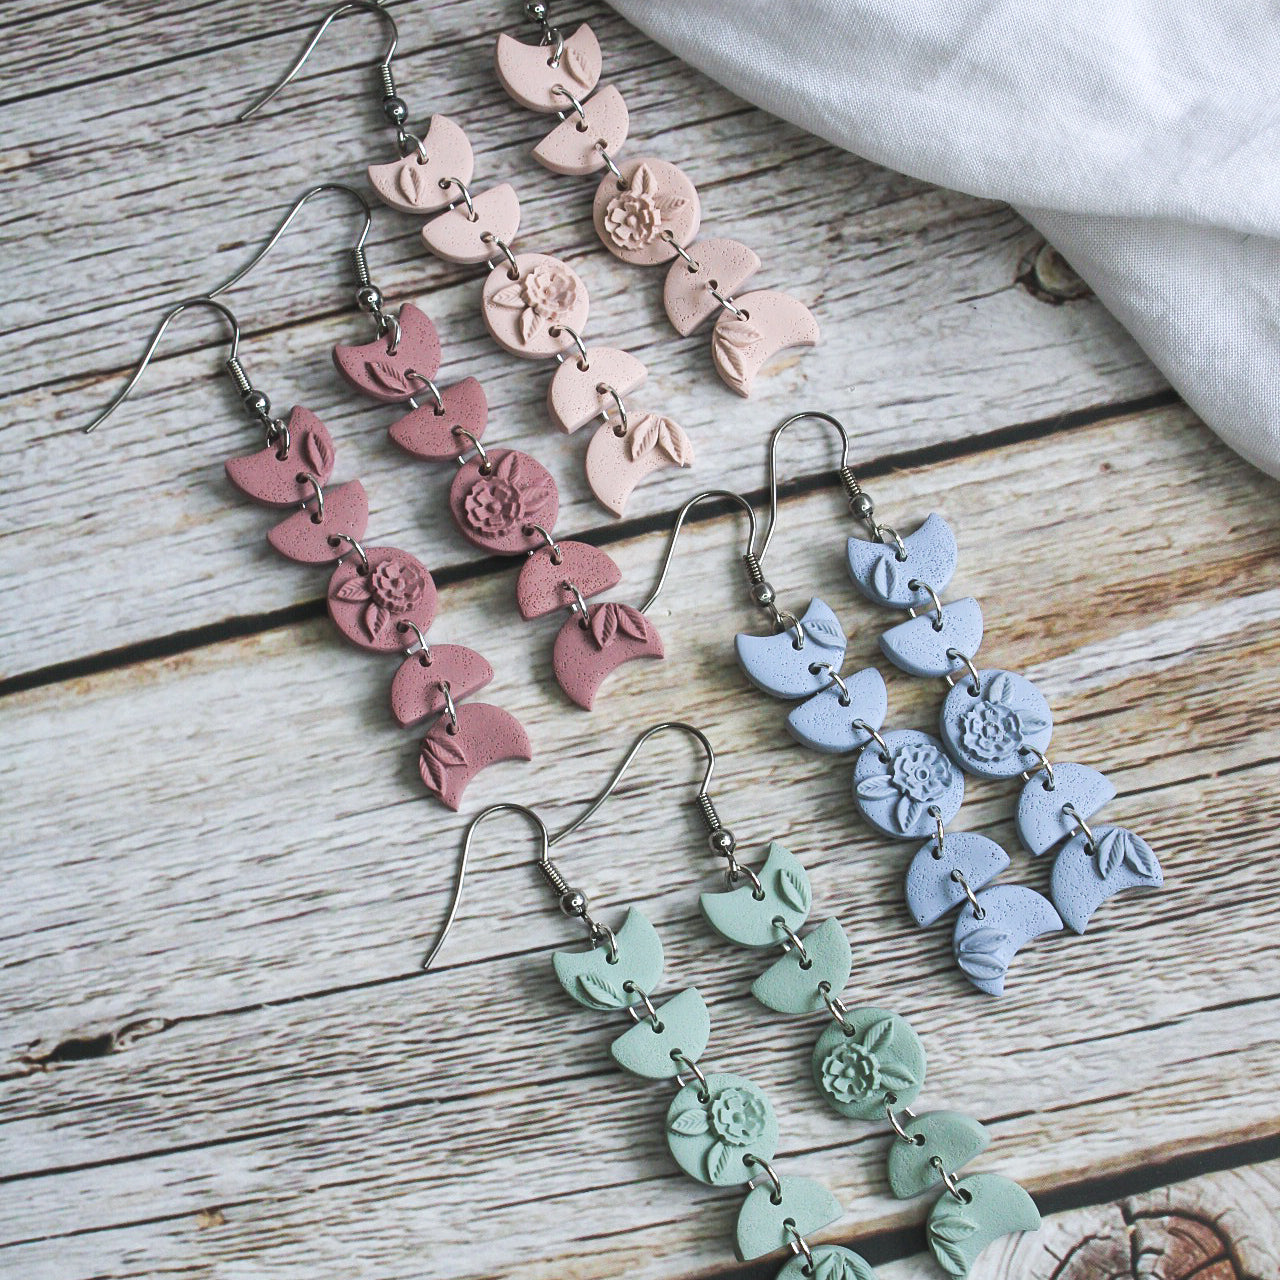 Cute selection of pastel polymer clay earrings that have been made by hand in New Zealand